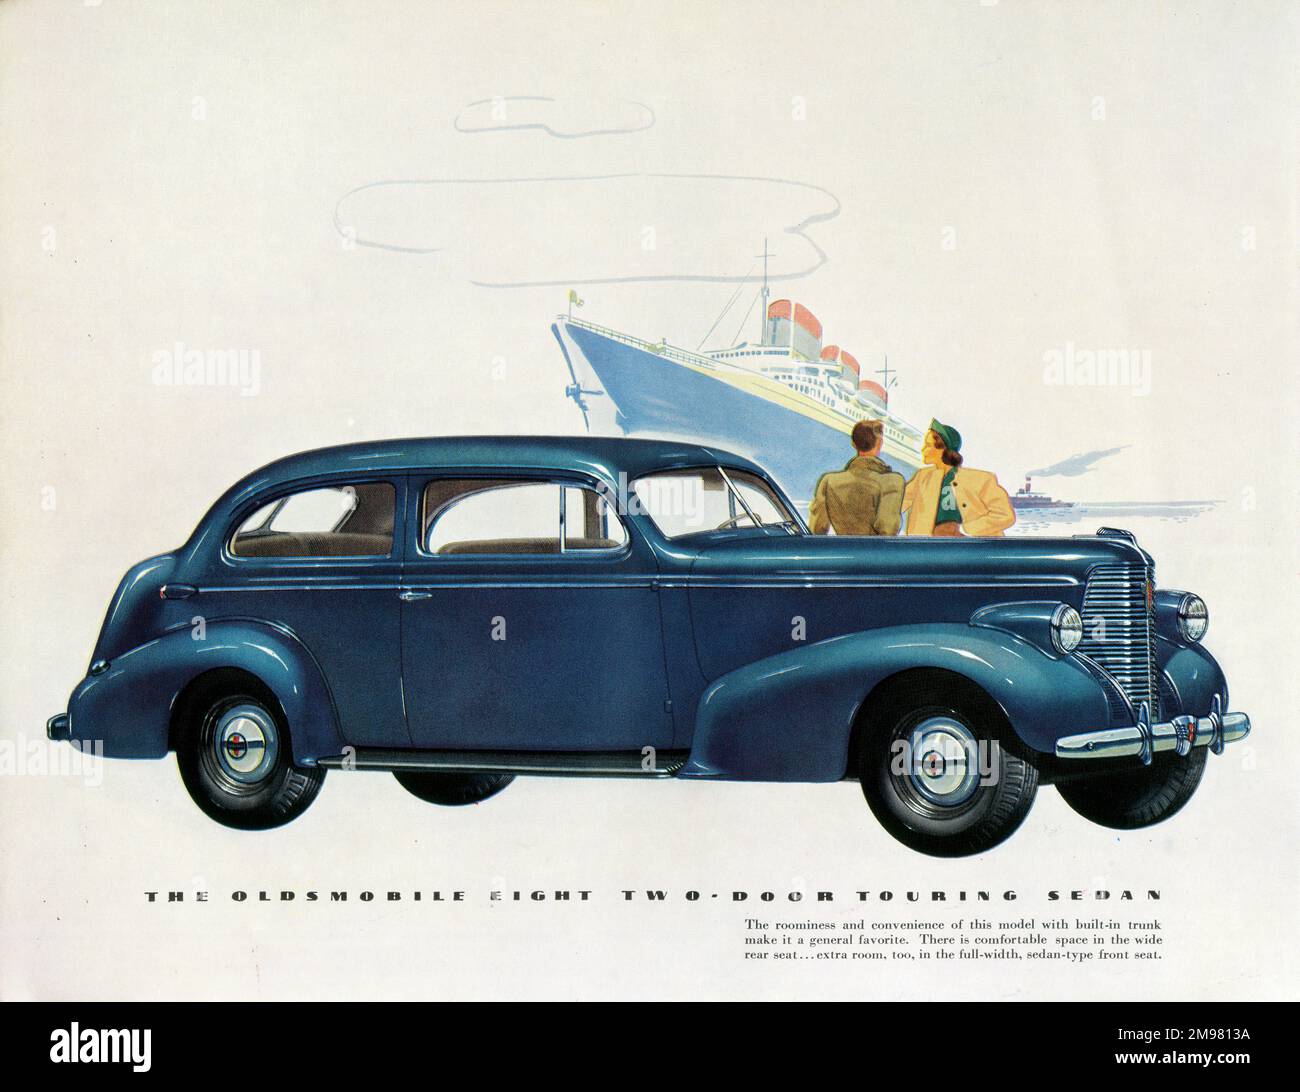 Brochure illustration, Oldsmobile Eight, showing a bright blue two-door touring sedan car, with a couple and the SS Normandie in the background. Stock Photo